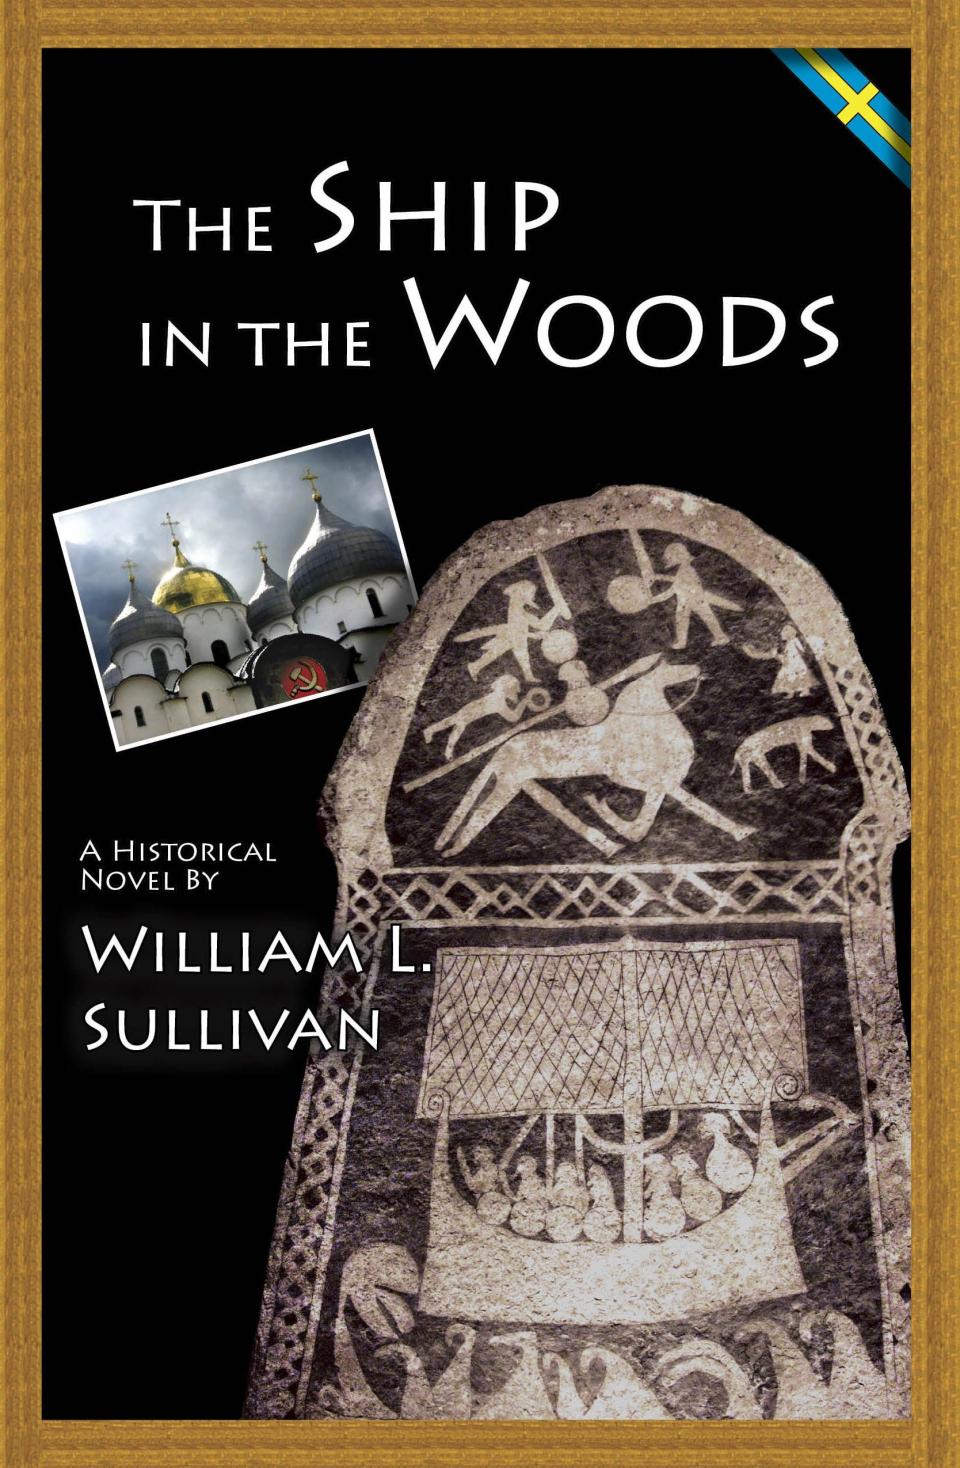 "The Ship in the Woods," by William Sullivan